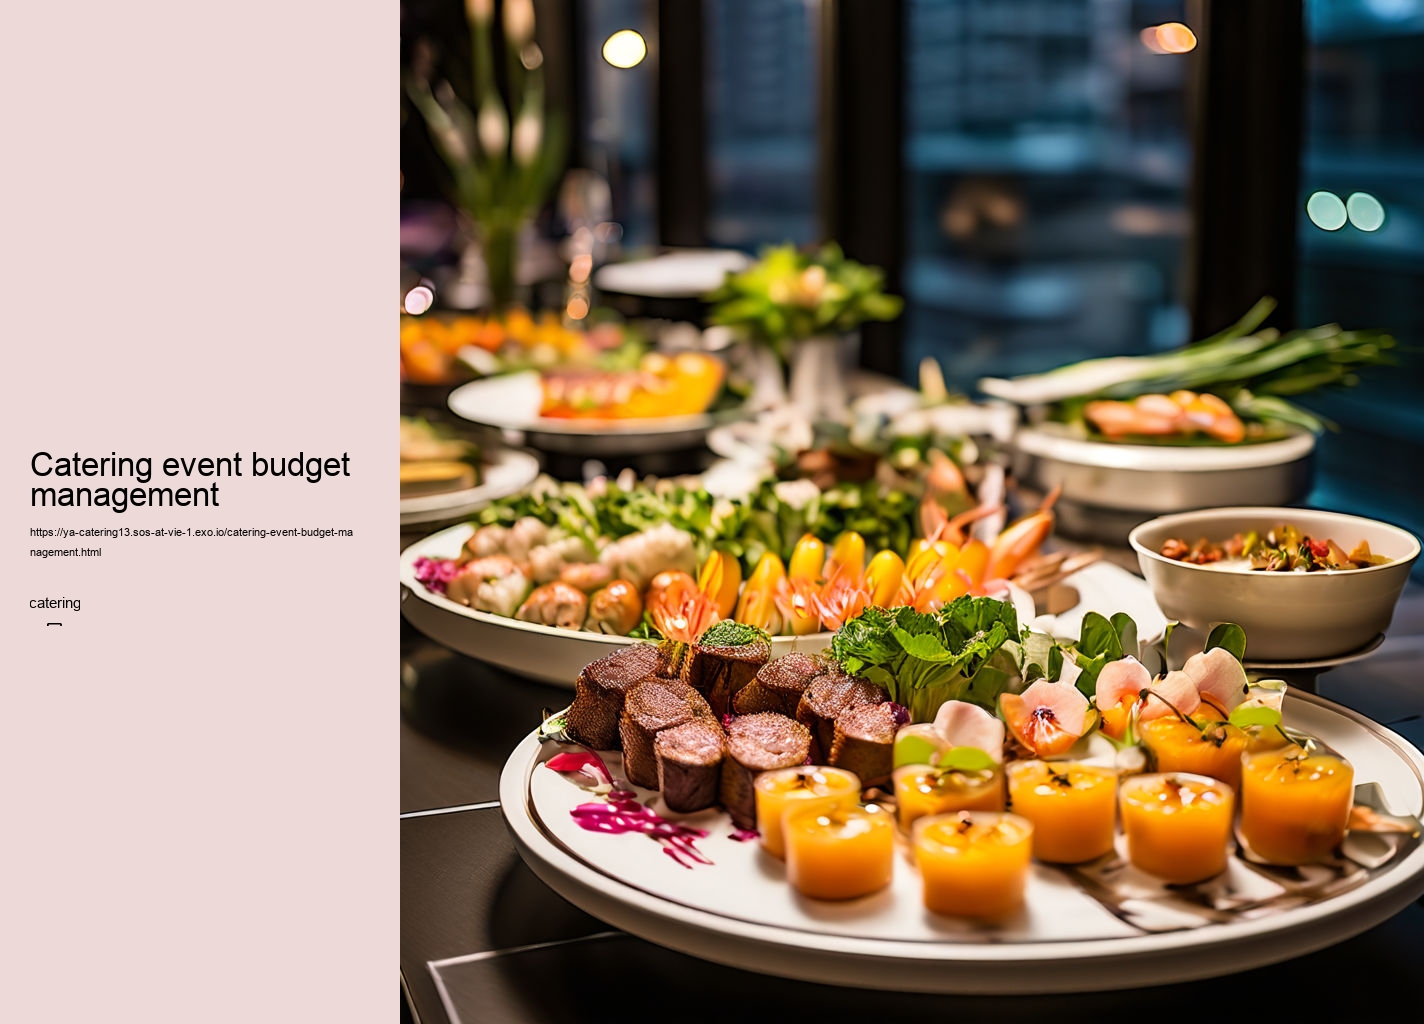 Catering event budget management